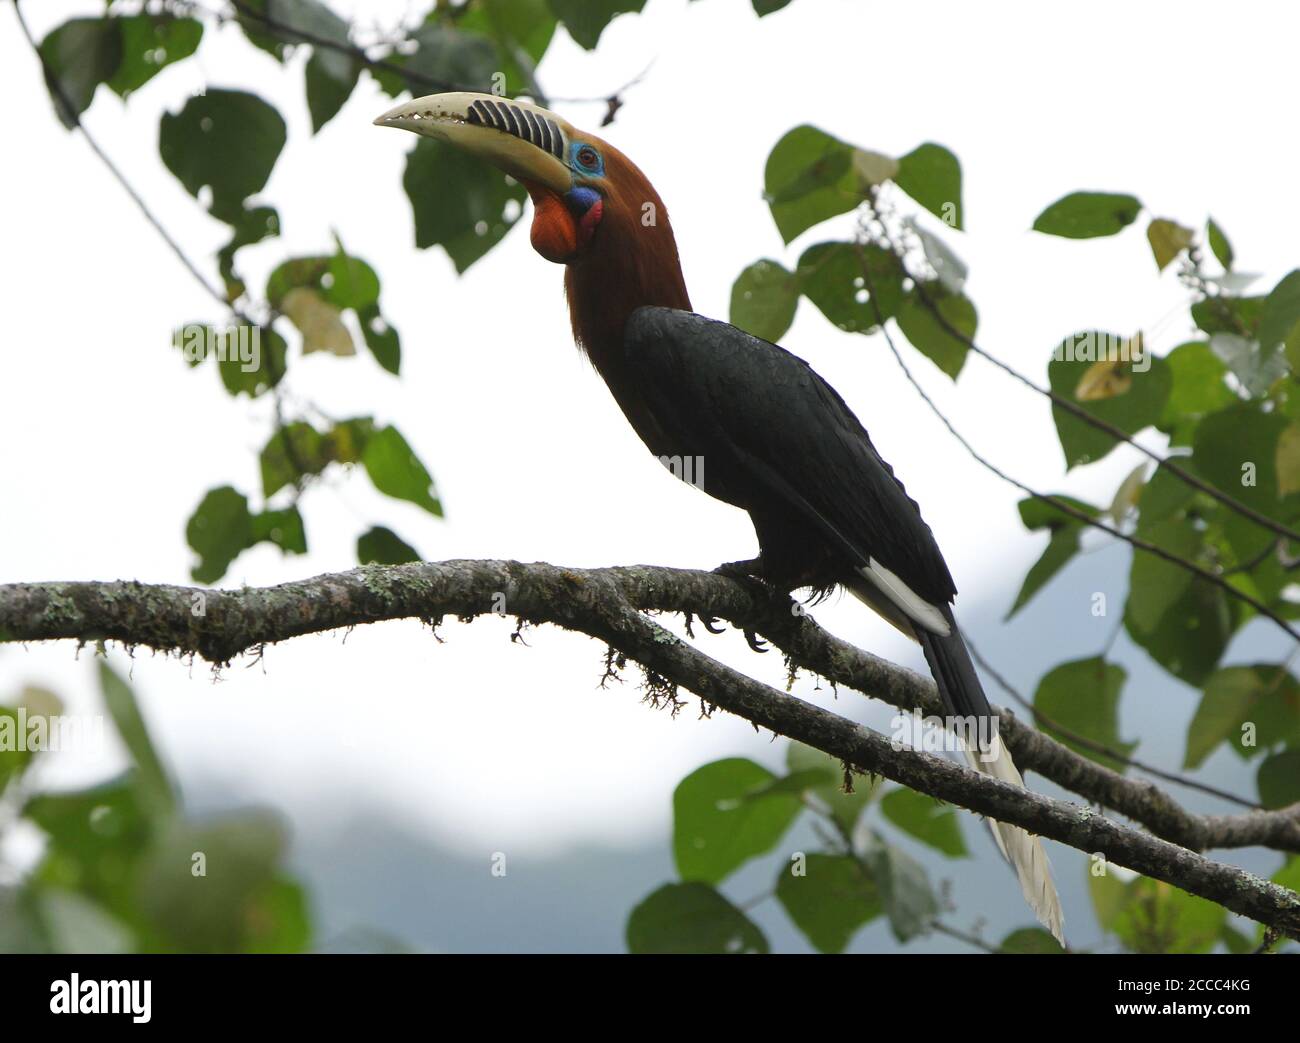 Rufous-necked Hornbill (Aceros nipalensis) in northeast India. A bird of ridged and hilly, chiefly broadleaved, forests in eastern Himalaya. Stock Photo